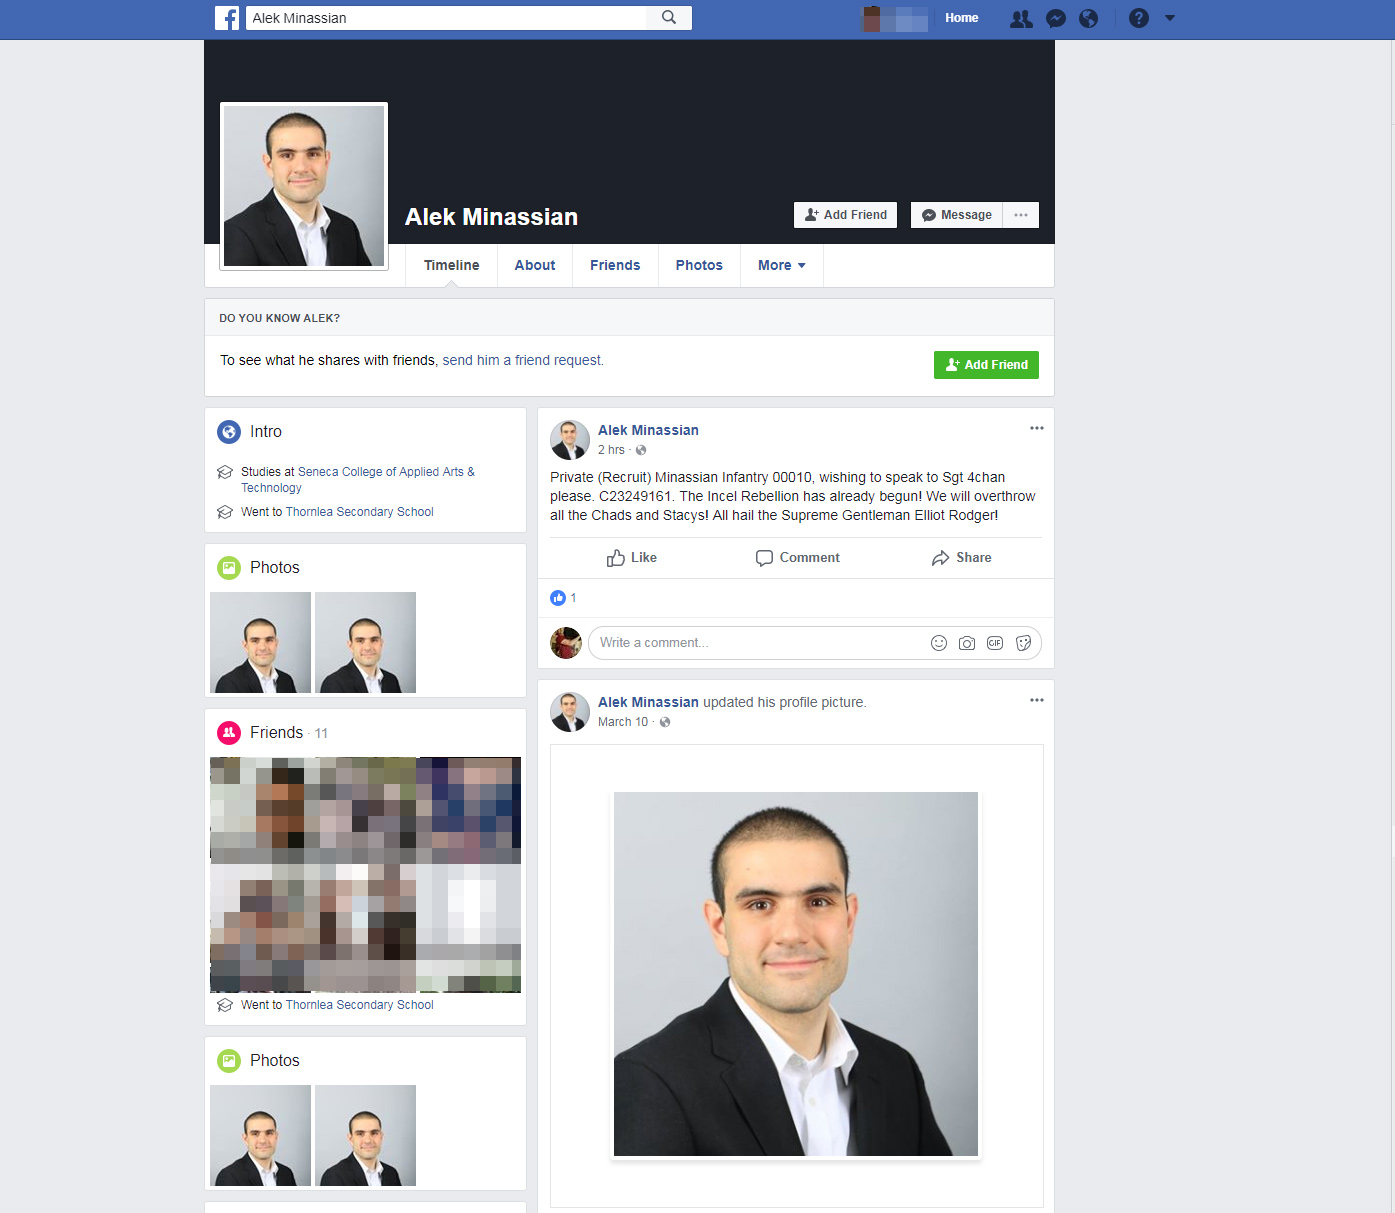 PHOTO: Alek Minassian had just one post on his Facebook account, which was taken down soon after the van attack in Toronto on April 23, 2018.